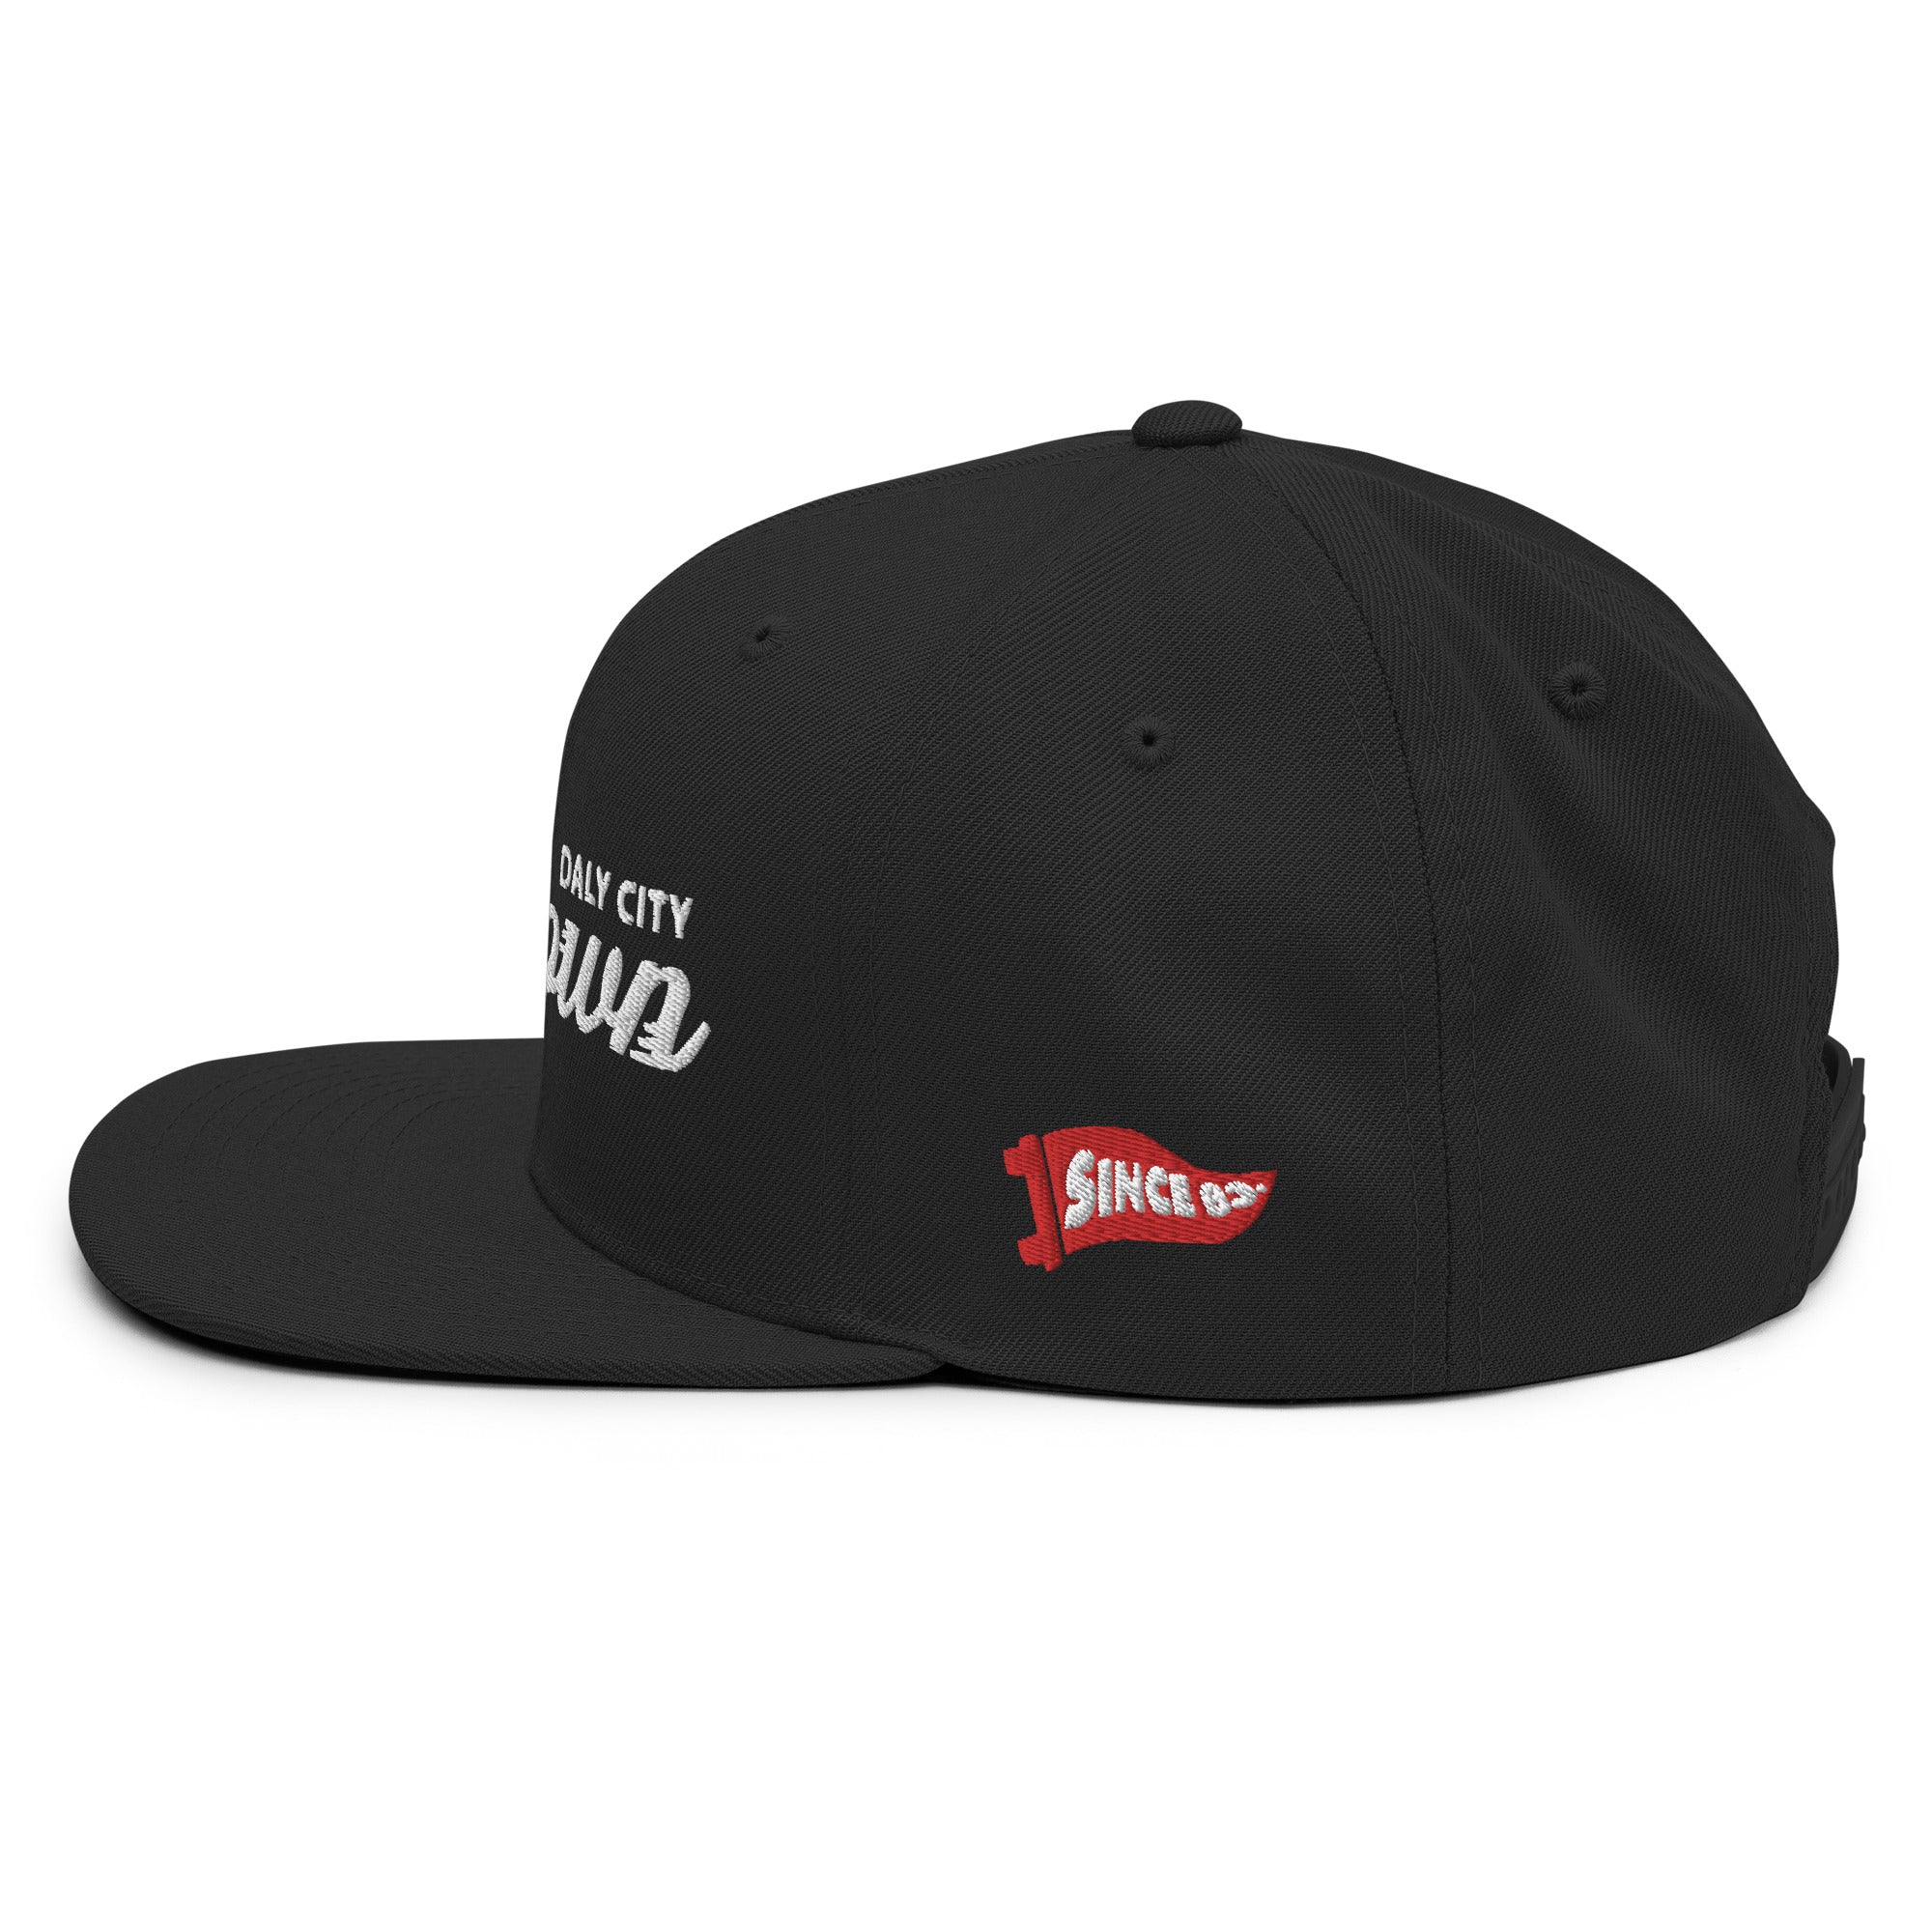 Fogtown Daly City | Snapback Hat